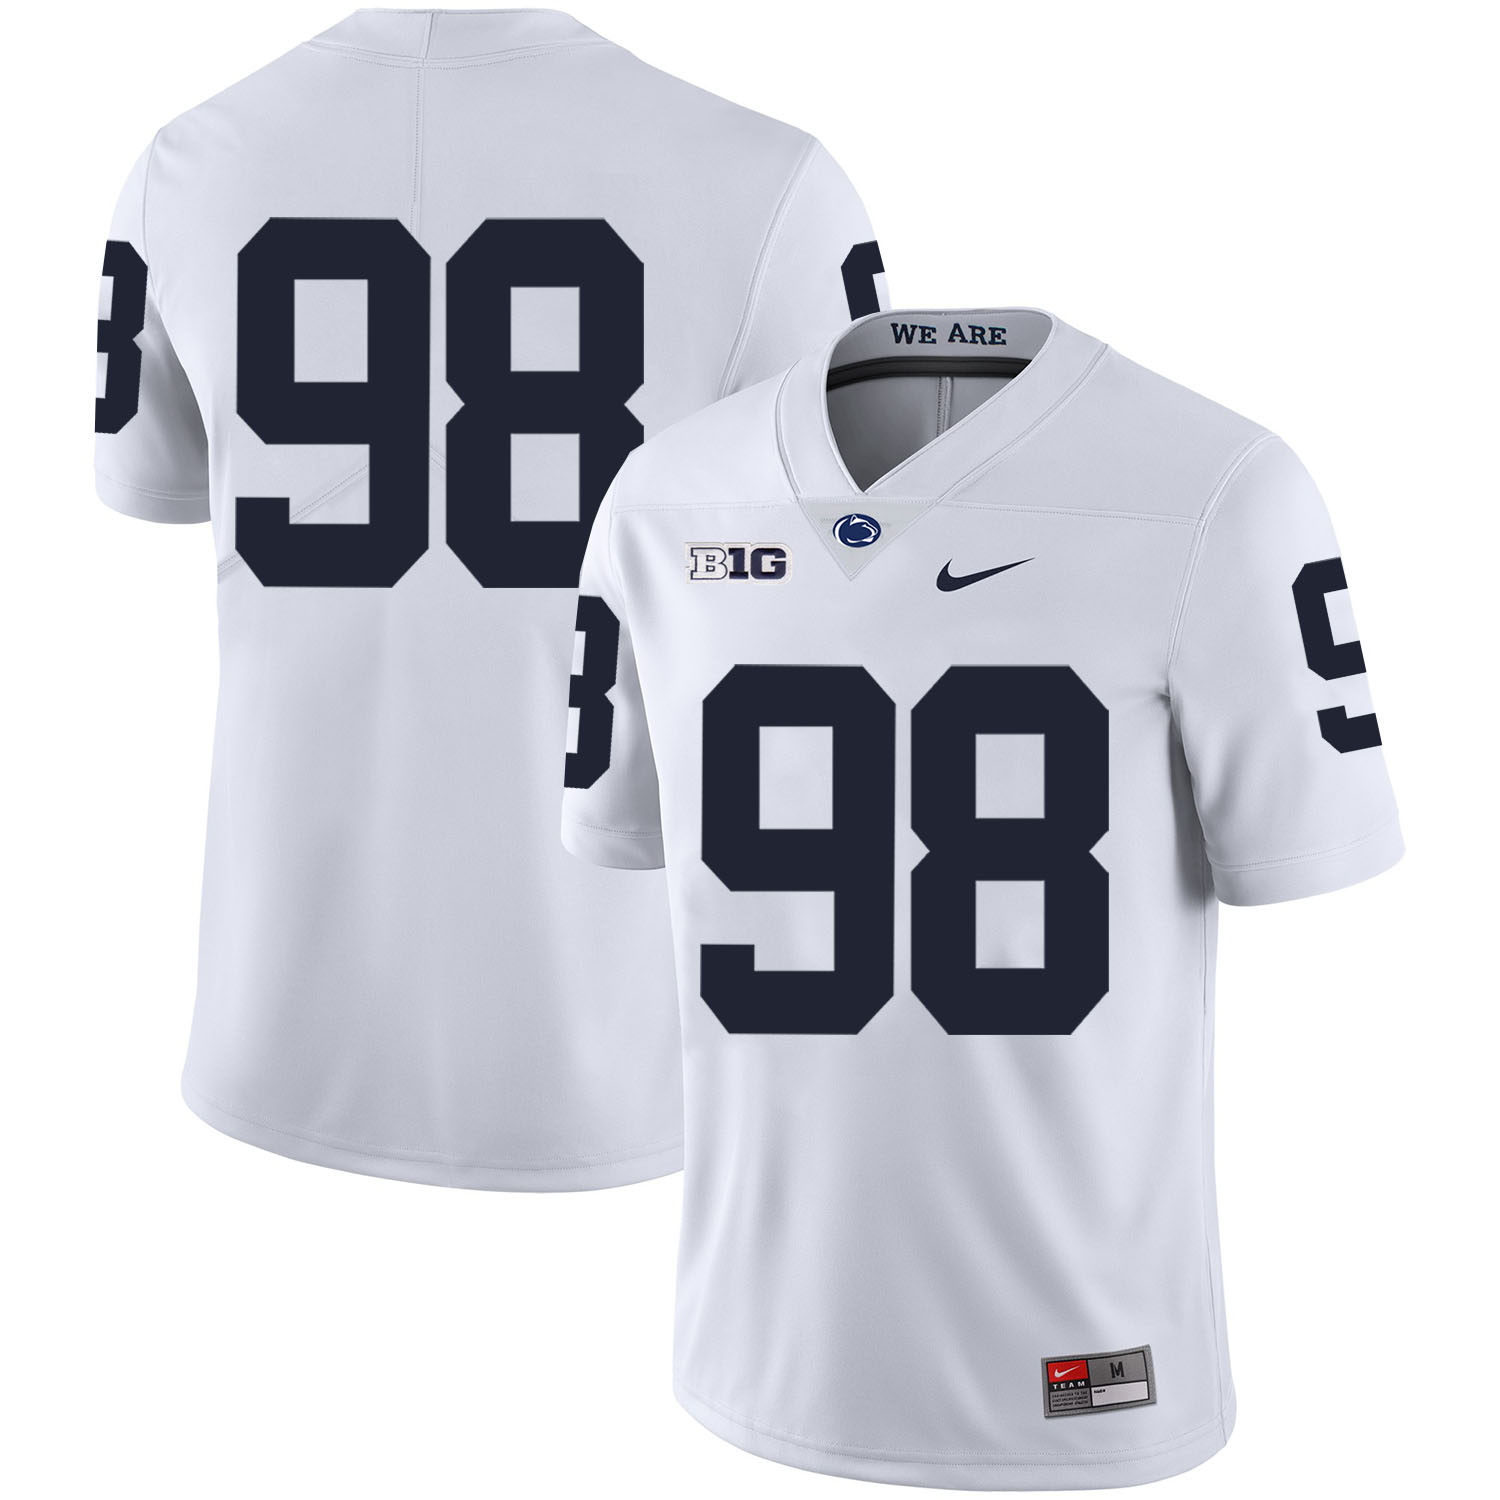 Penn State Nittany Lions 98 Anthony Zettel White Nike College Football Jersey